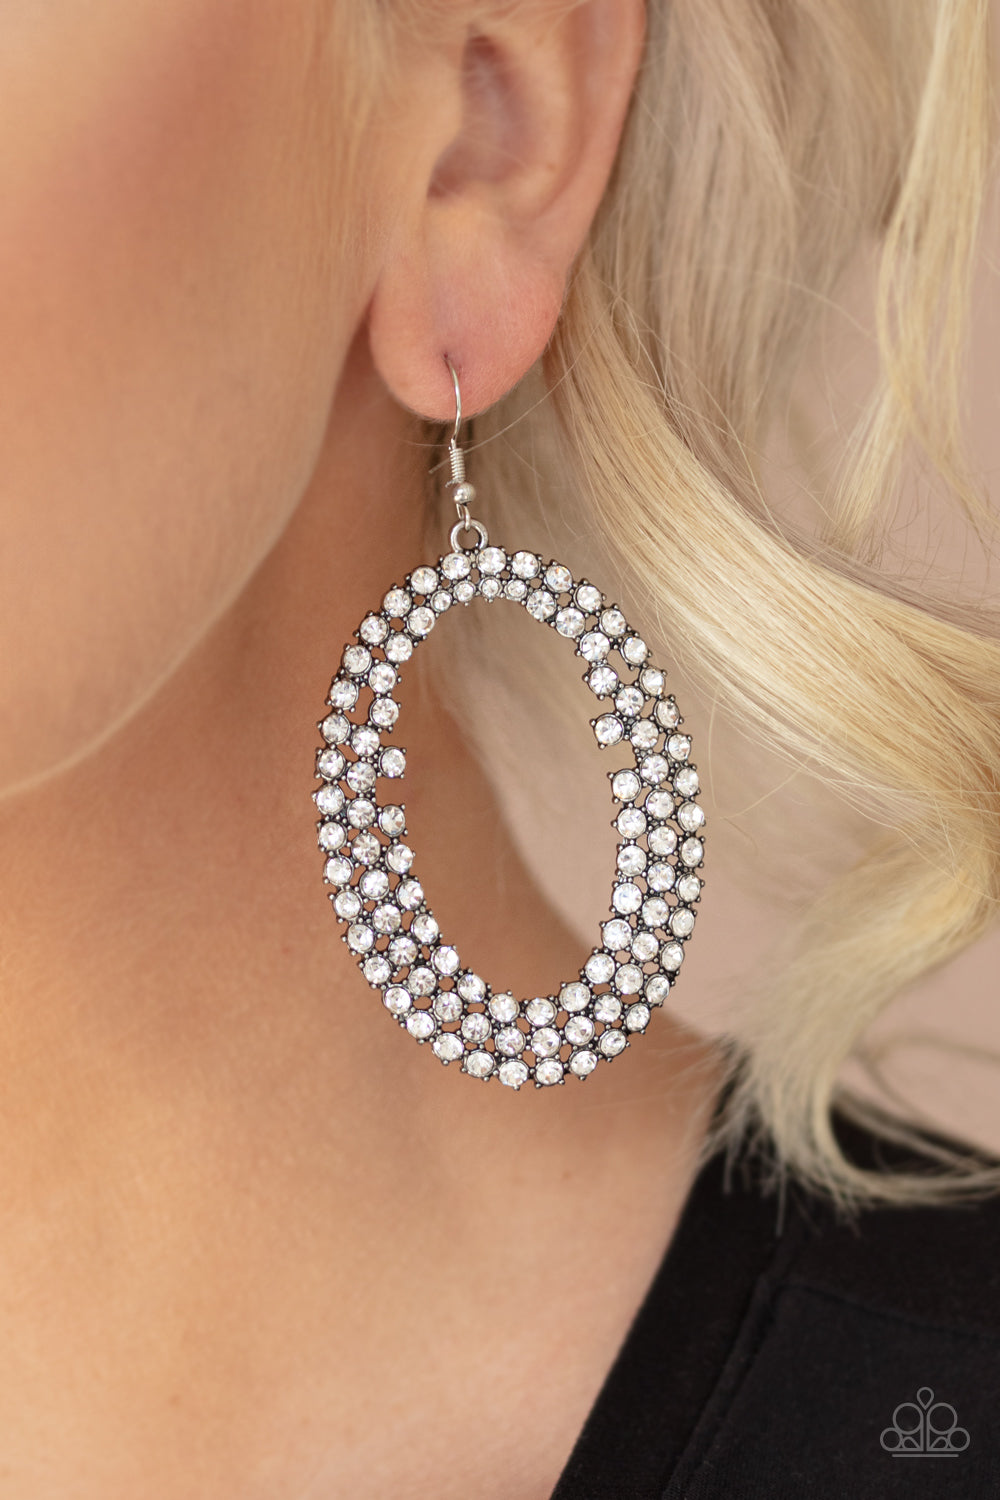 Radical Razzle White Rhinestone Earring - Paparazzi Accessories Item #E407 Row after row of glittery white rhinestones encircle into an oversized hoop, creating a gritty glamorous look. Earring attaches to a standard fishhook fitting. All Paparazzi Accessories are lead free and nickel free!  Sold as one pair of earrings.